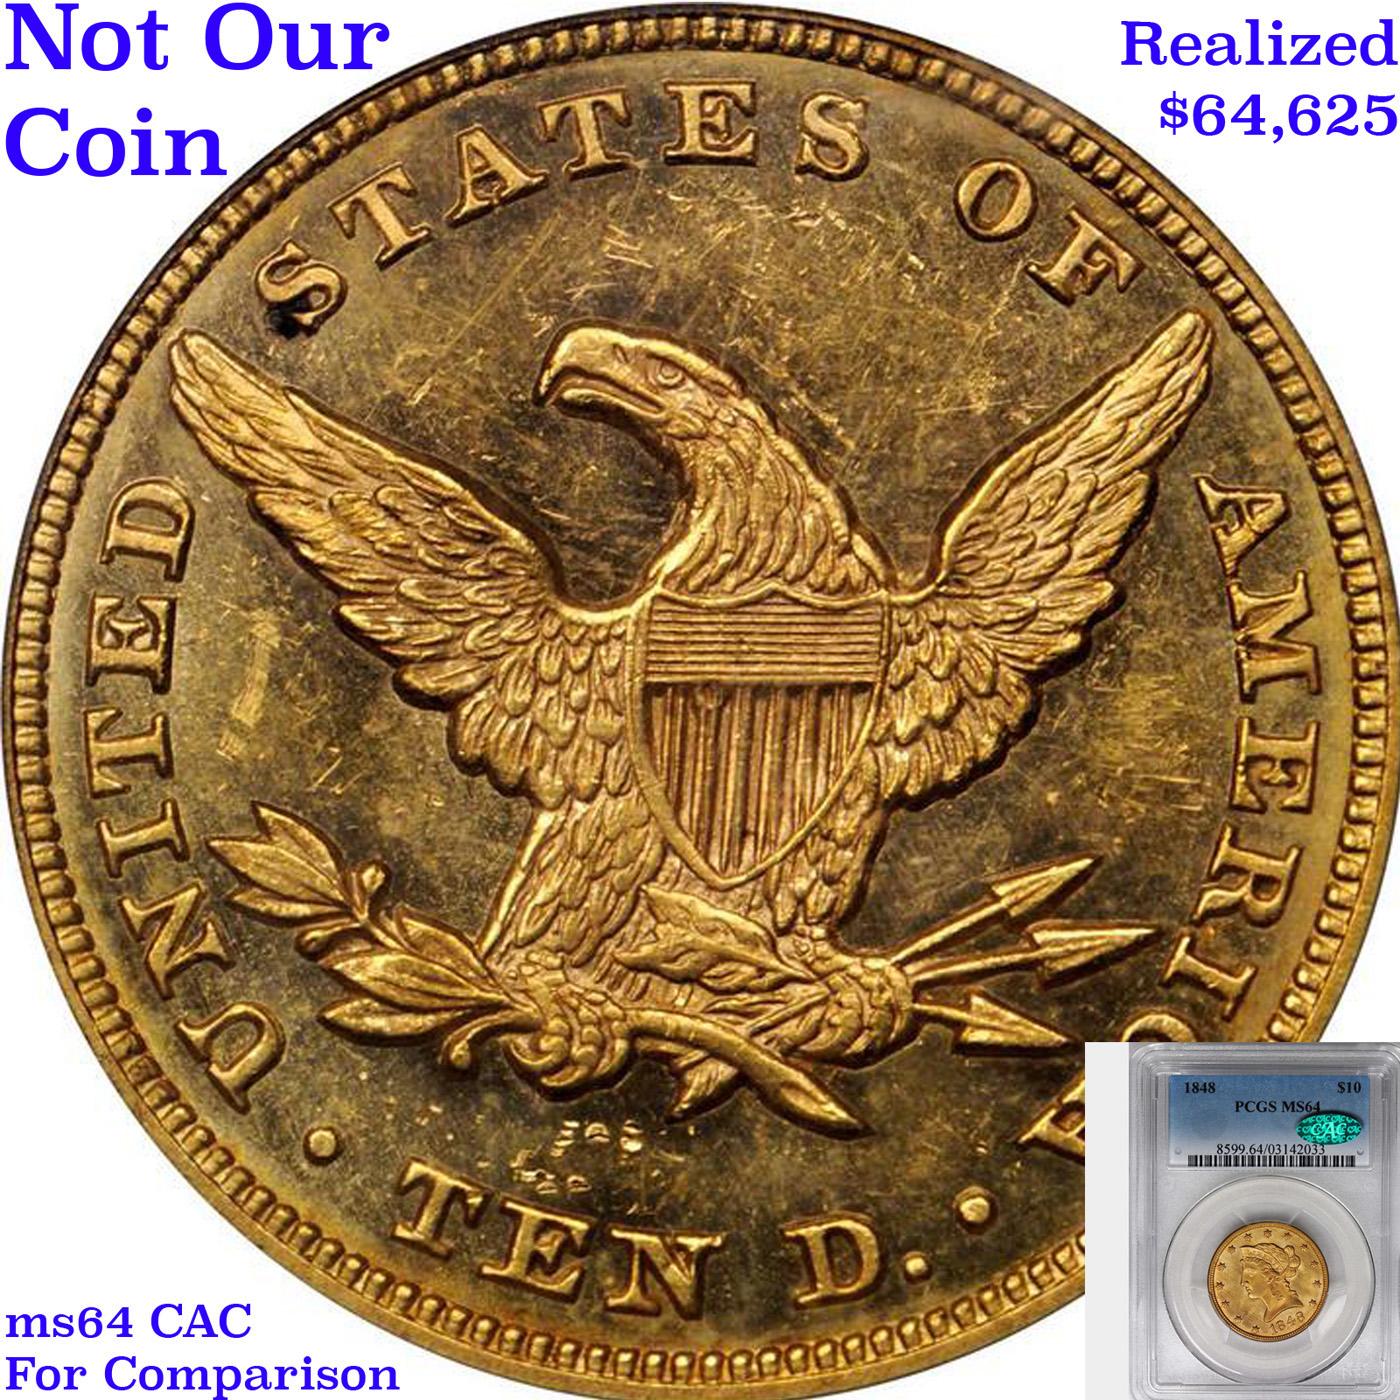 ***Auction Highlight*** 1848-p Gold Liberty Eagle $10 Graded ms63+ By SEGS (fc)